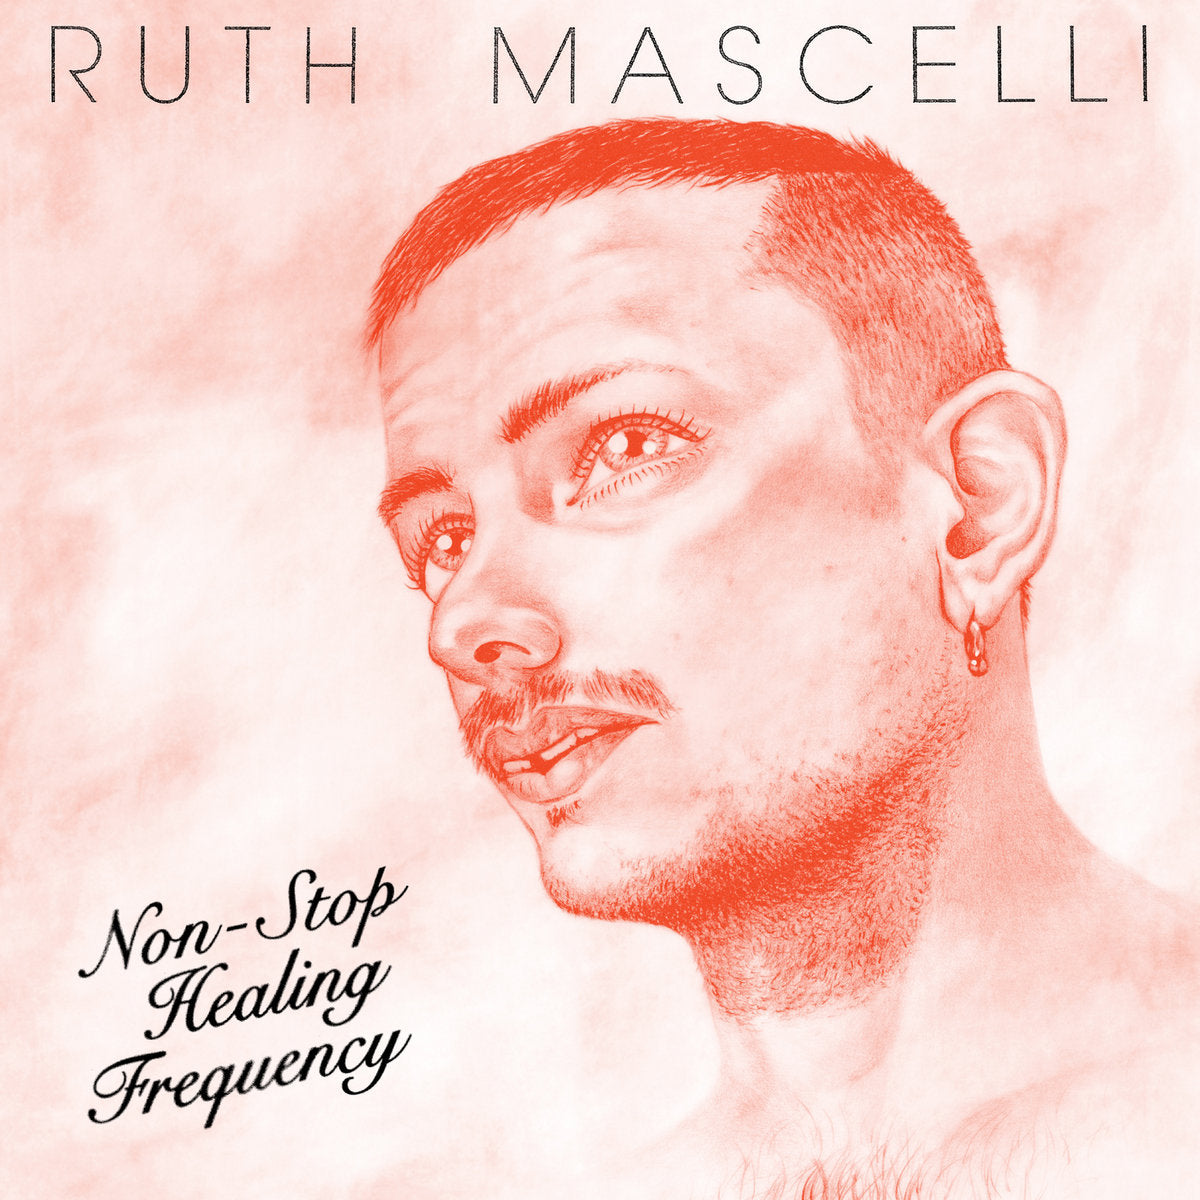 Mascelli, Ruth "Non-Stop Healing Frequency"